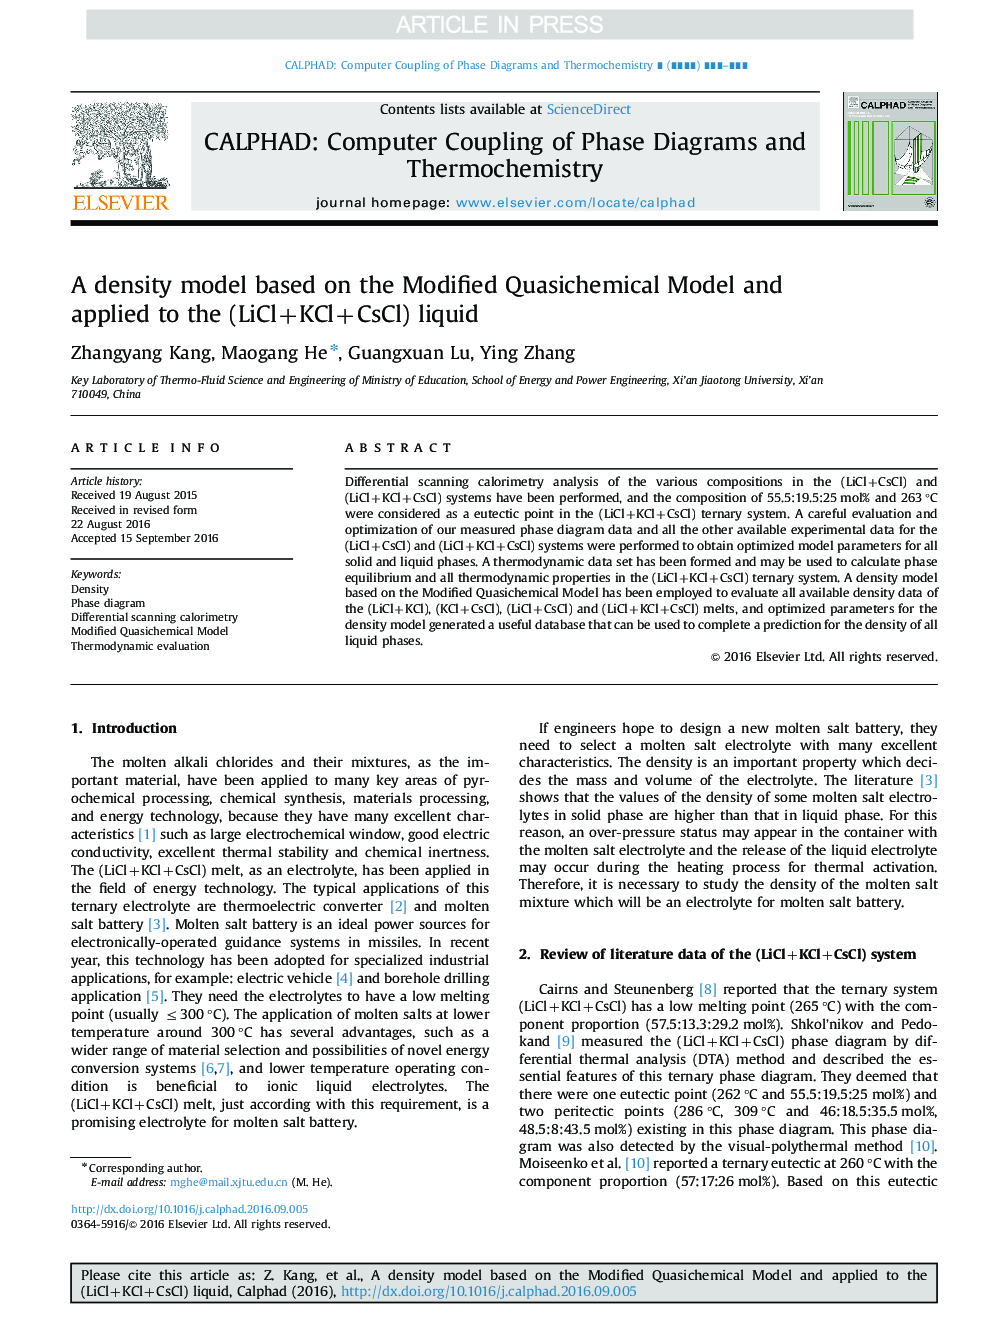 A density model based on the Modified Quasichemical Model and applied to the (LiCl+KCl+CsCl) liquid